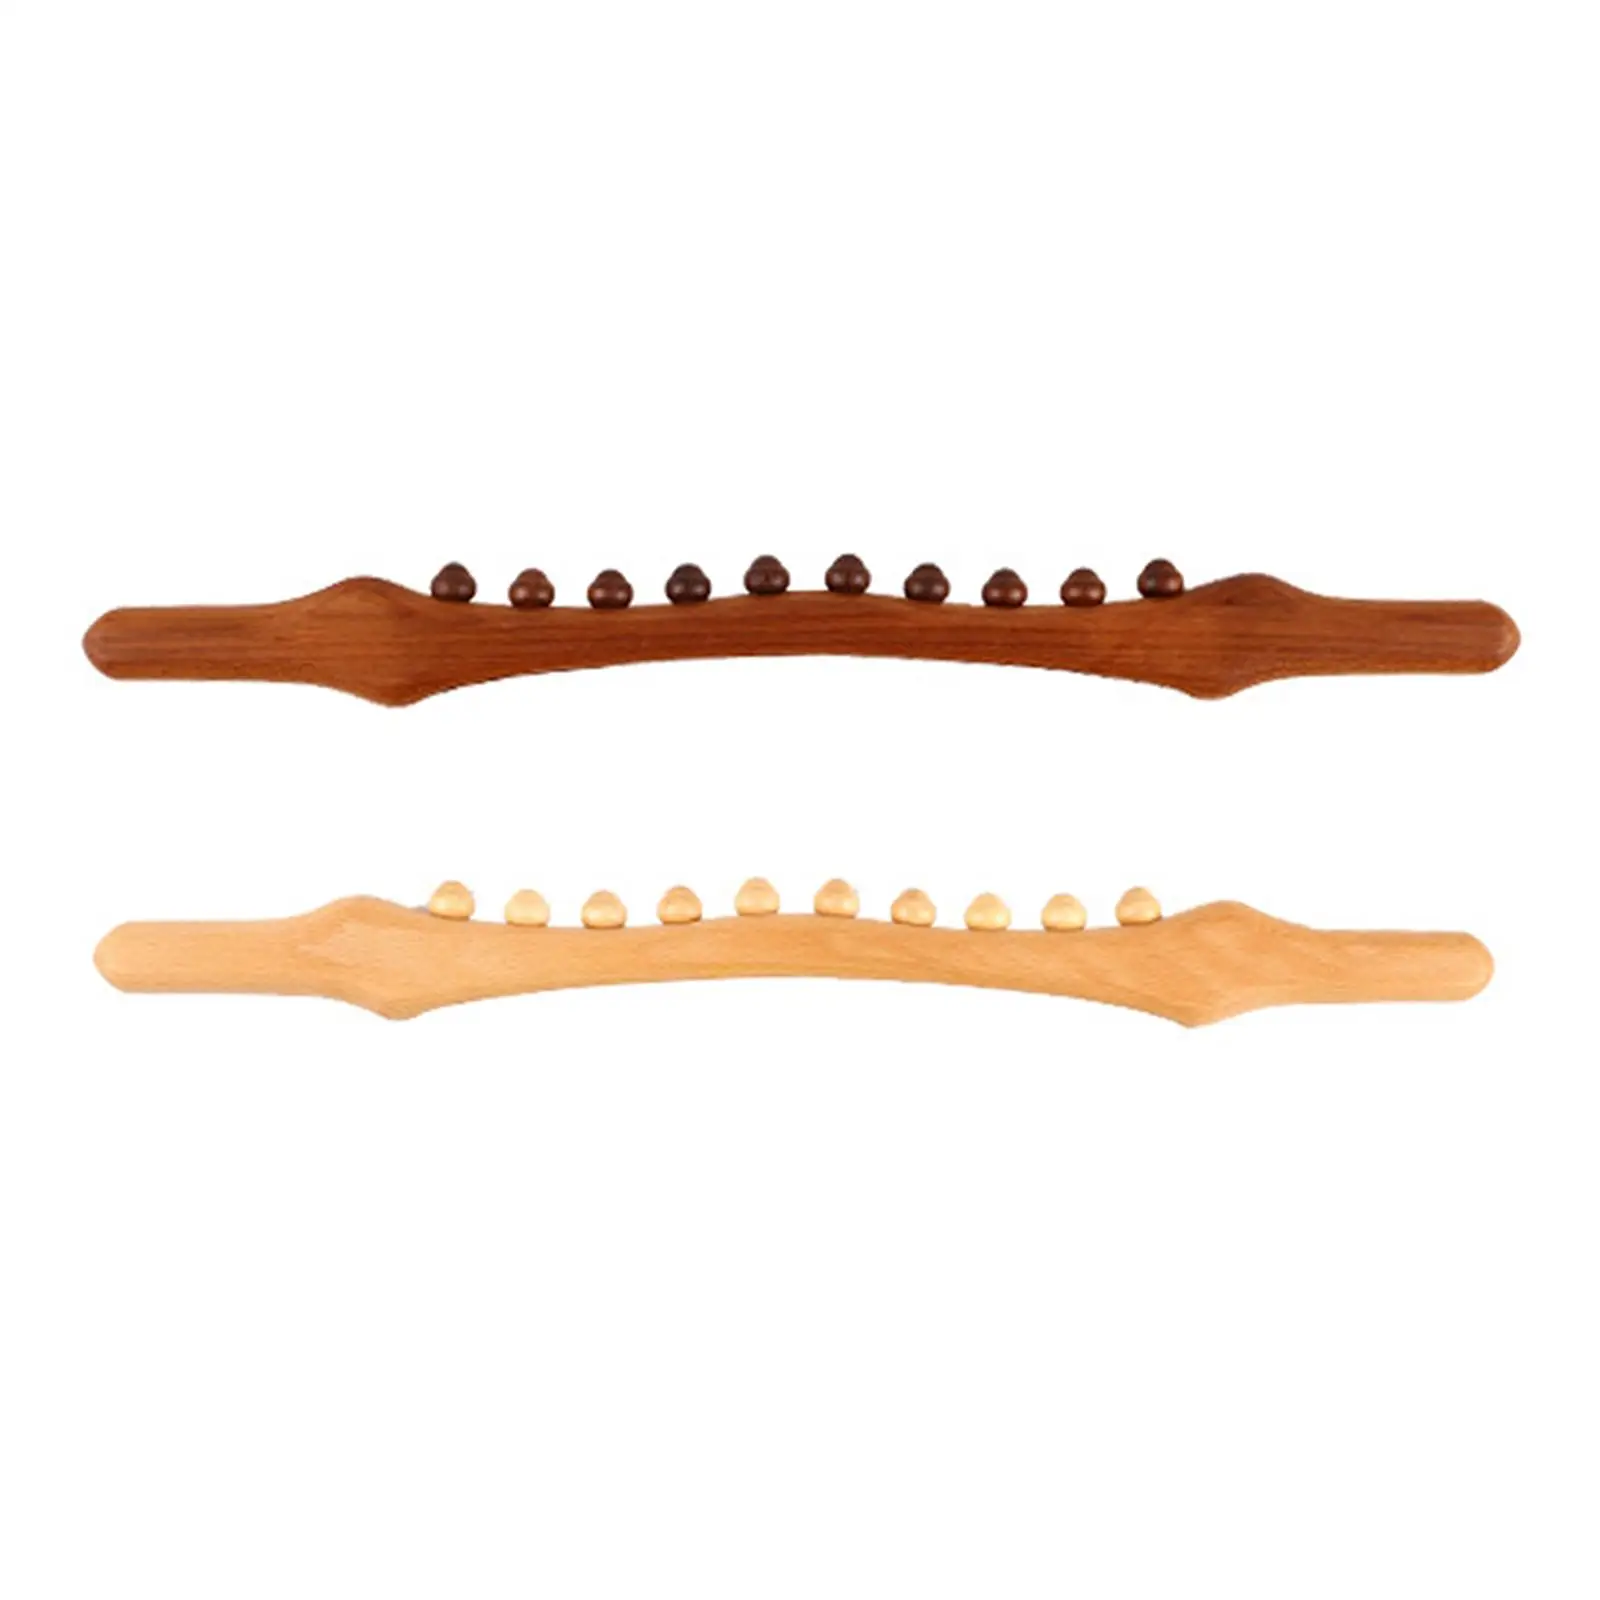 Wooden Gua Sha Scraping Massage Tool 10 Beads Acupuncture Massager Relieve Sore Muscles Massager Body Meridian for Neck Waist